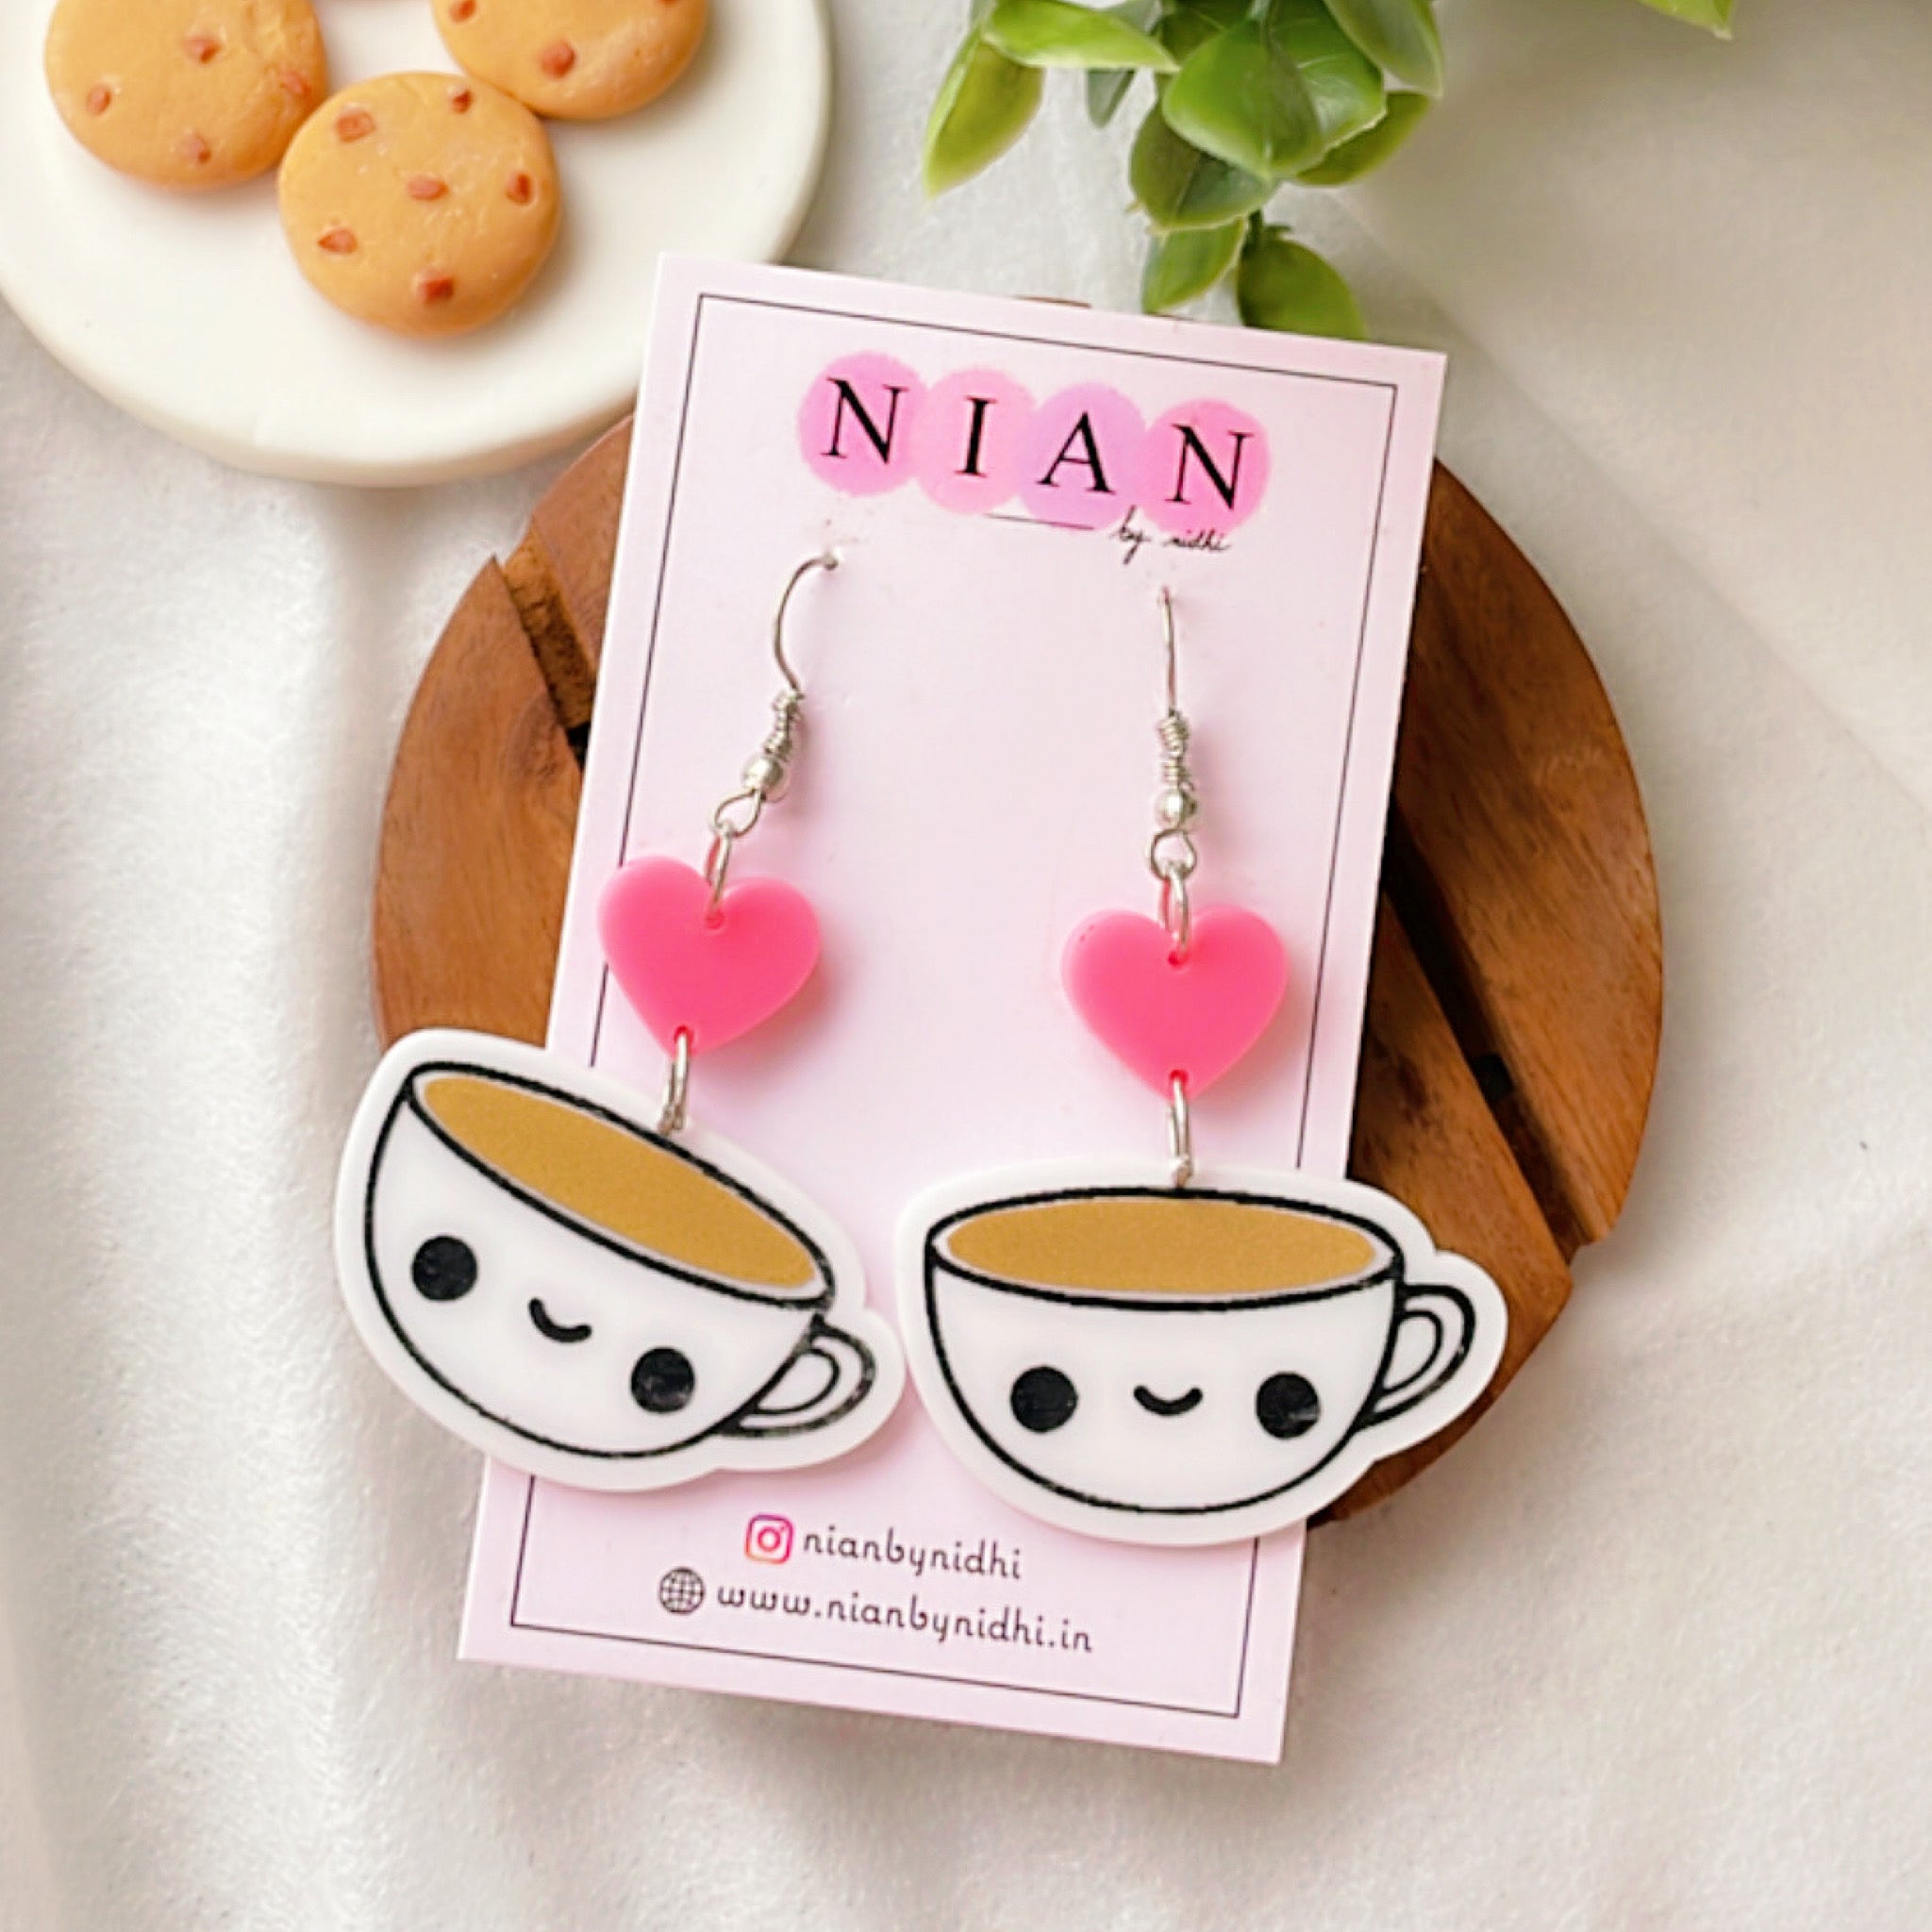 Candid Coffee Earrings - White, Pink & Brown - Nian by Nidhi - placed in a white background with cookies